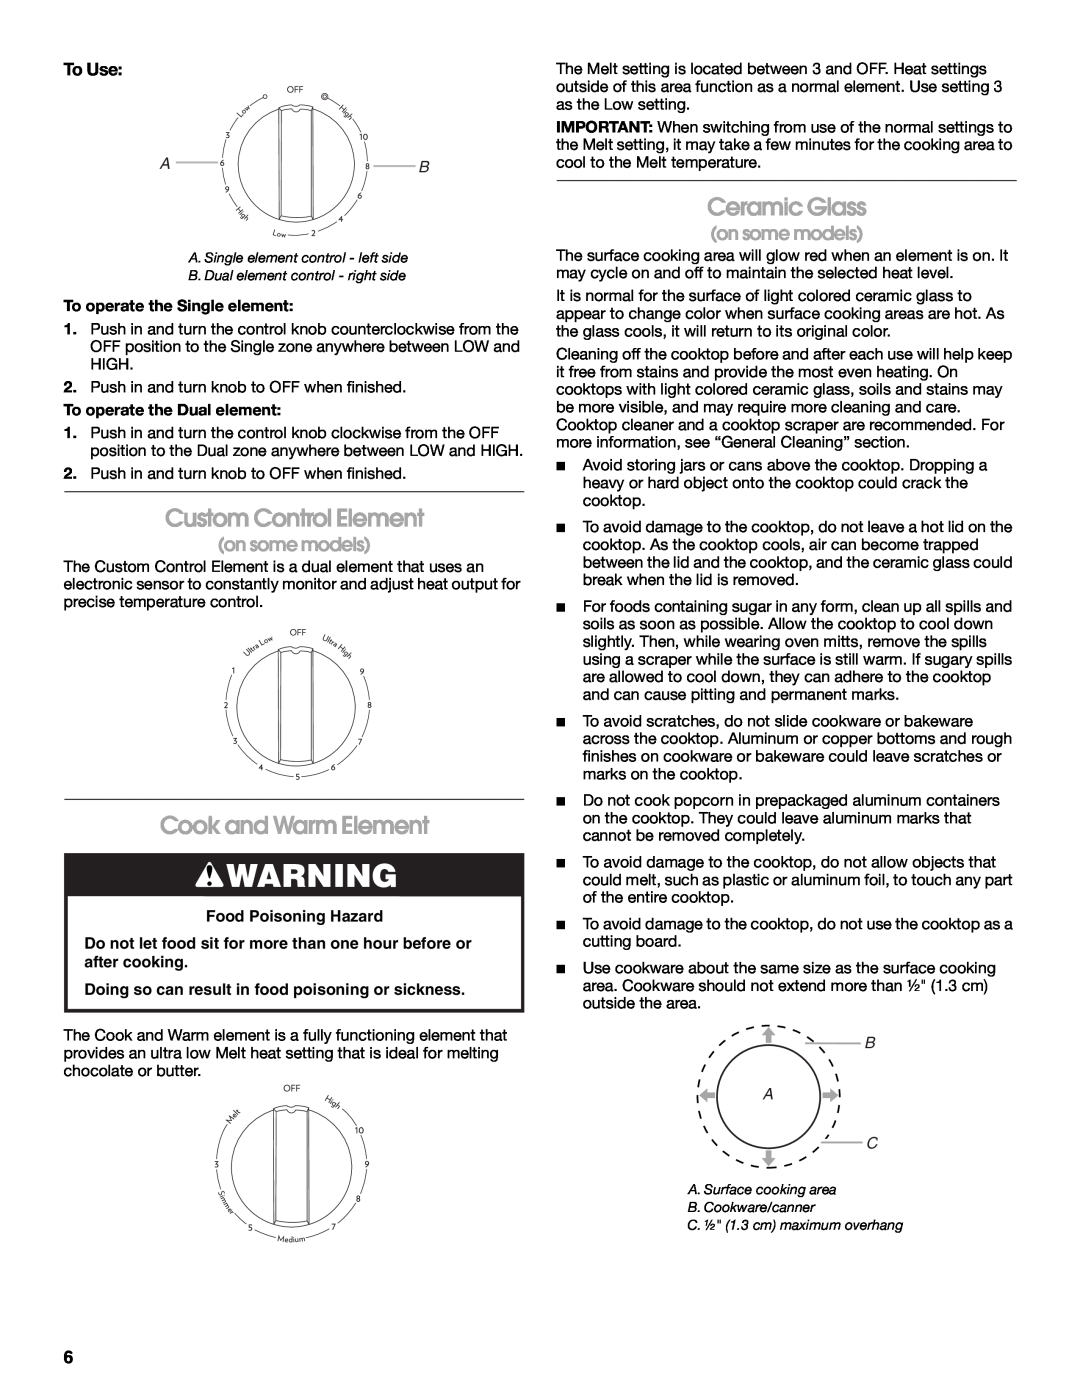 Jenn-Air JES9900 Custom Control Element, Cook and Warm Element, Ceramic Glass, To Use, A B, Food Poisoning Hazard, B A C 